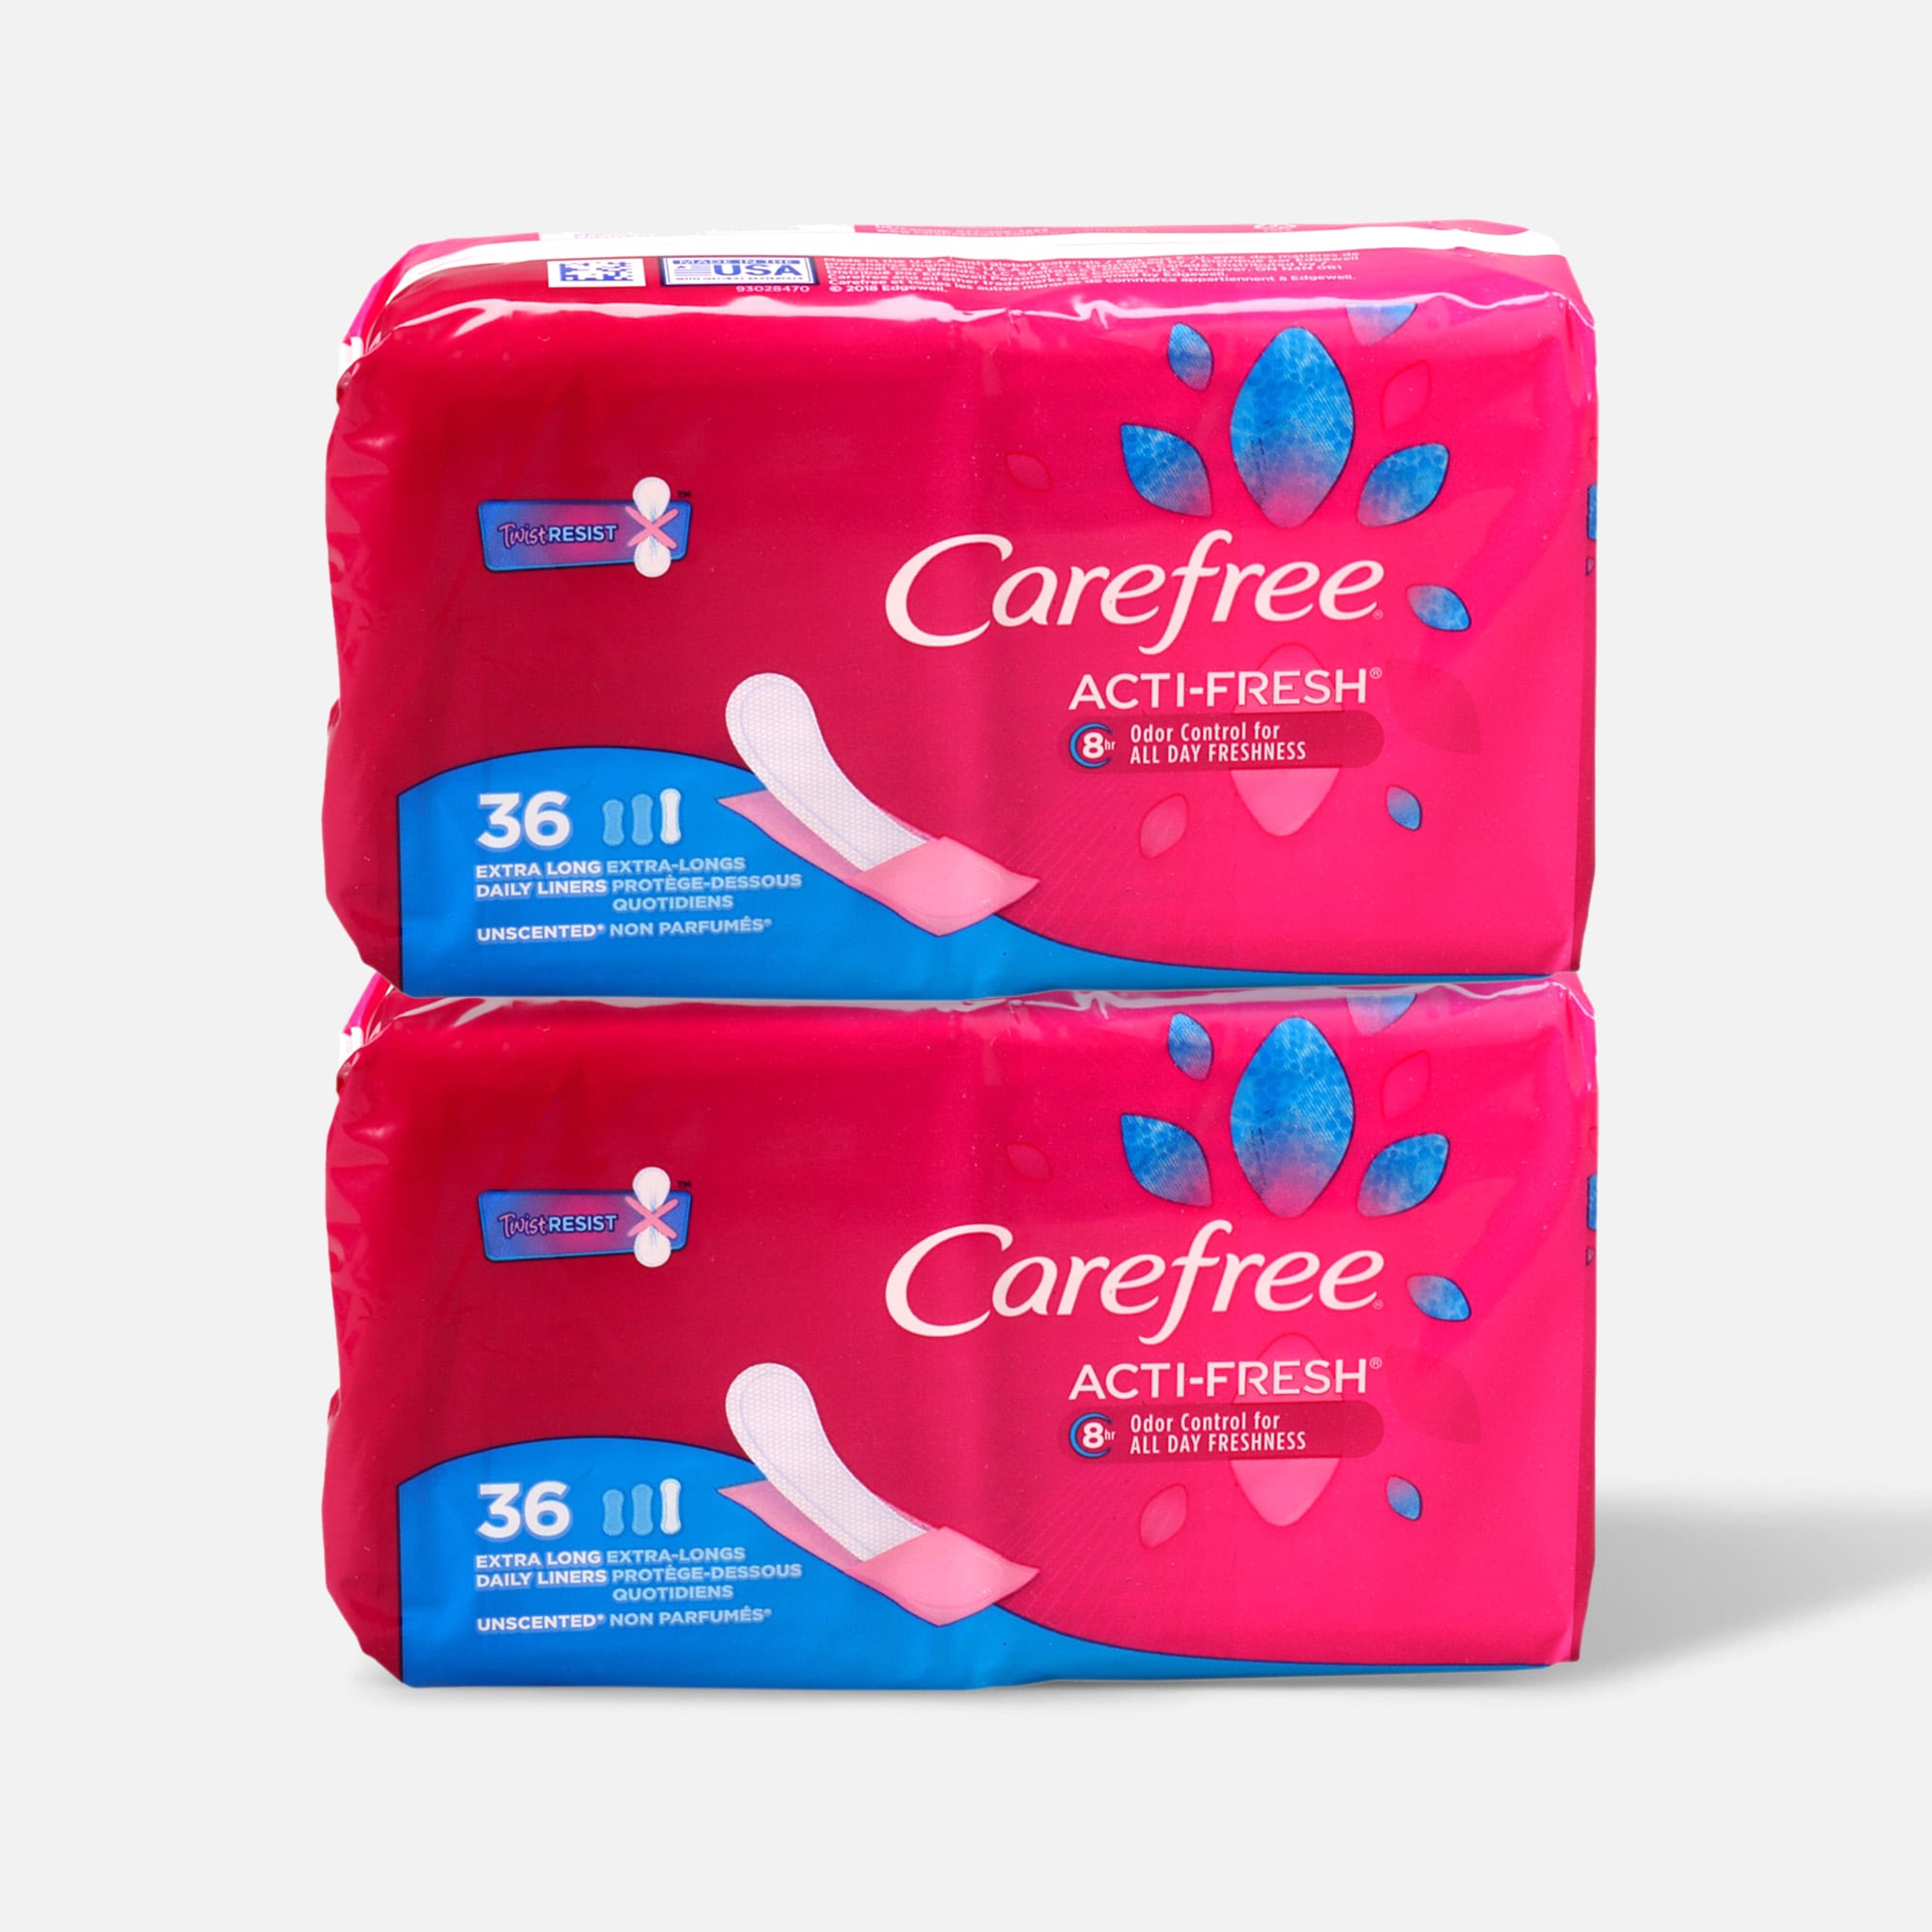 FSA Eligible | Carefree Acti-Fresh Extra Long Pantiliners, Unscented, 36  ct. (2-Pack)